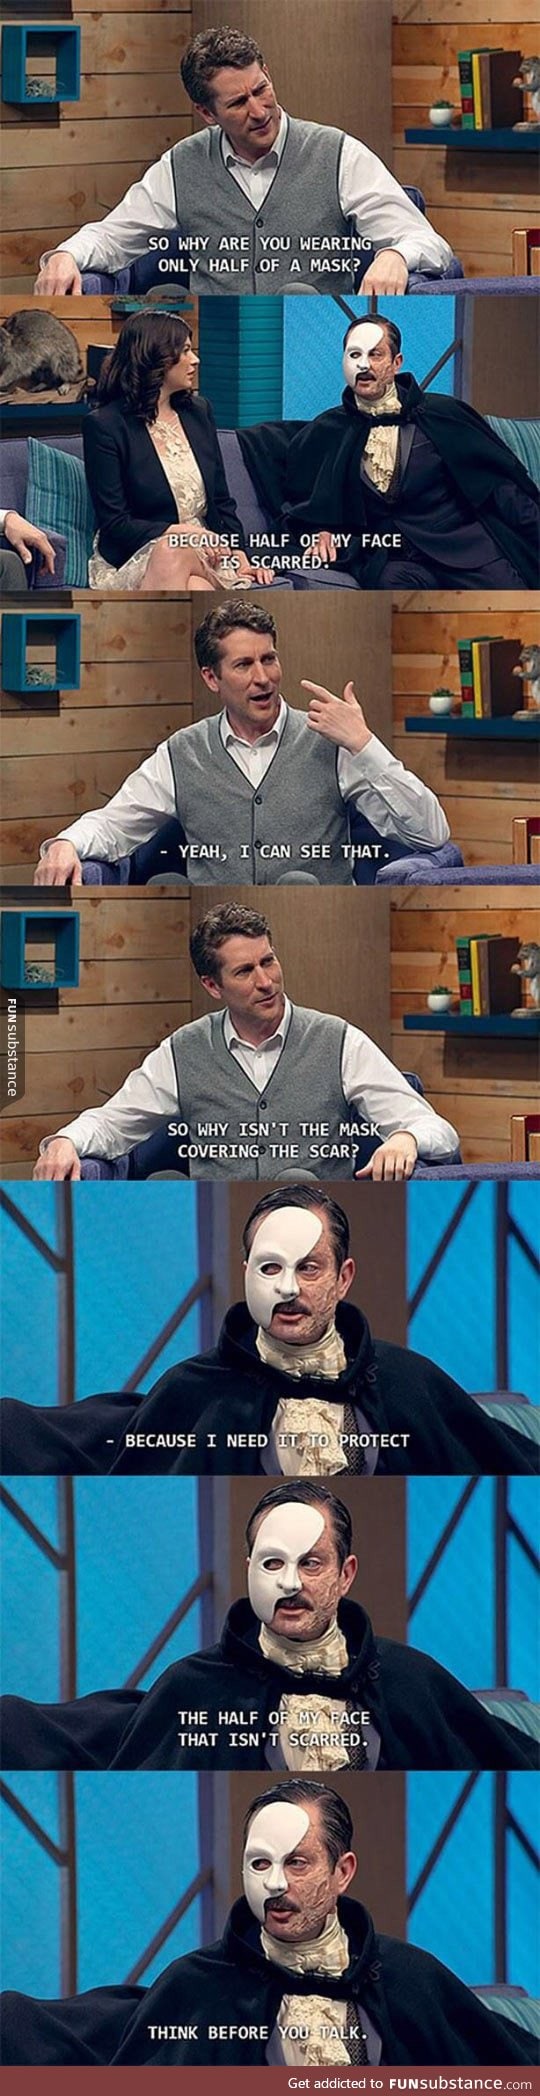 Why are you wearing half a mask?